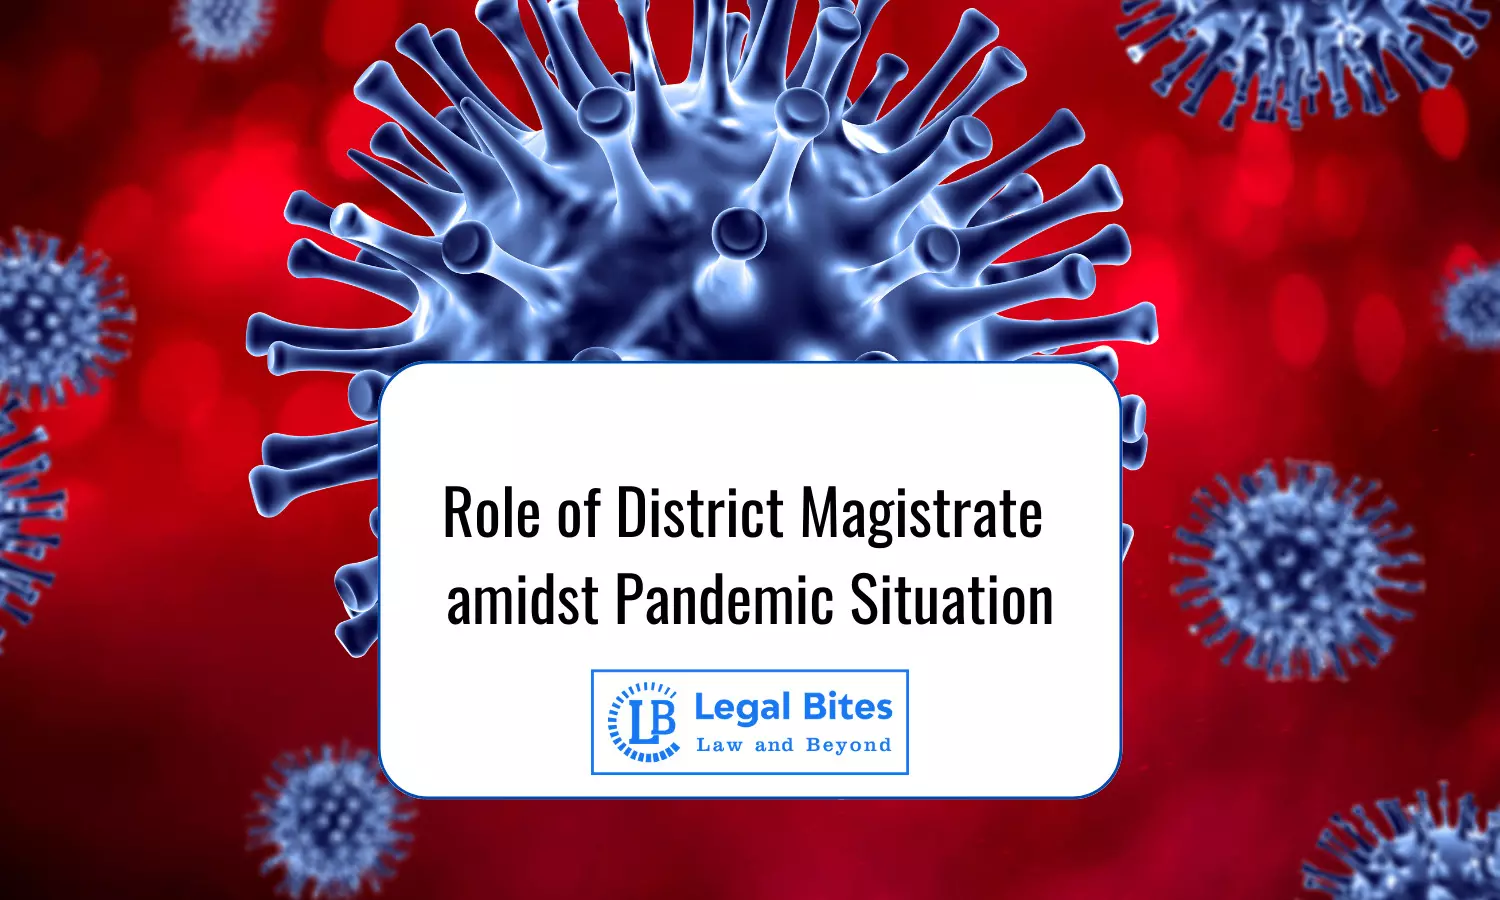 Role of District Magistrate amidst Pandemic Situation